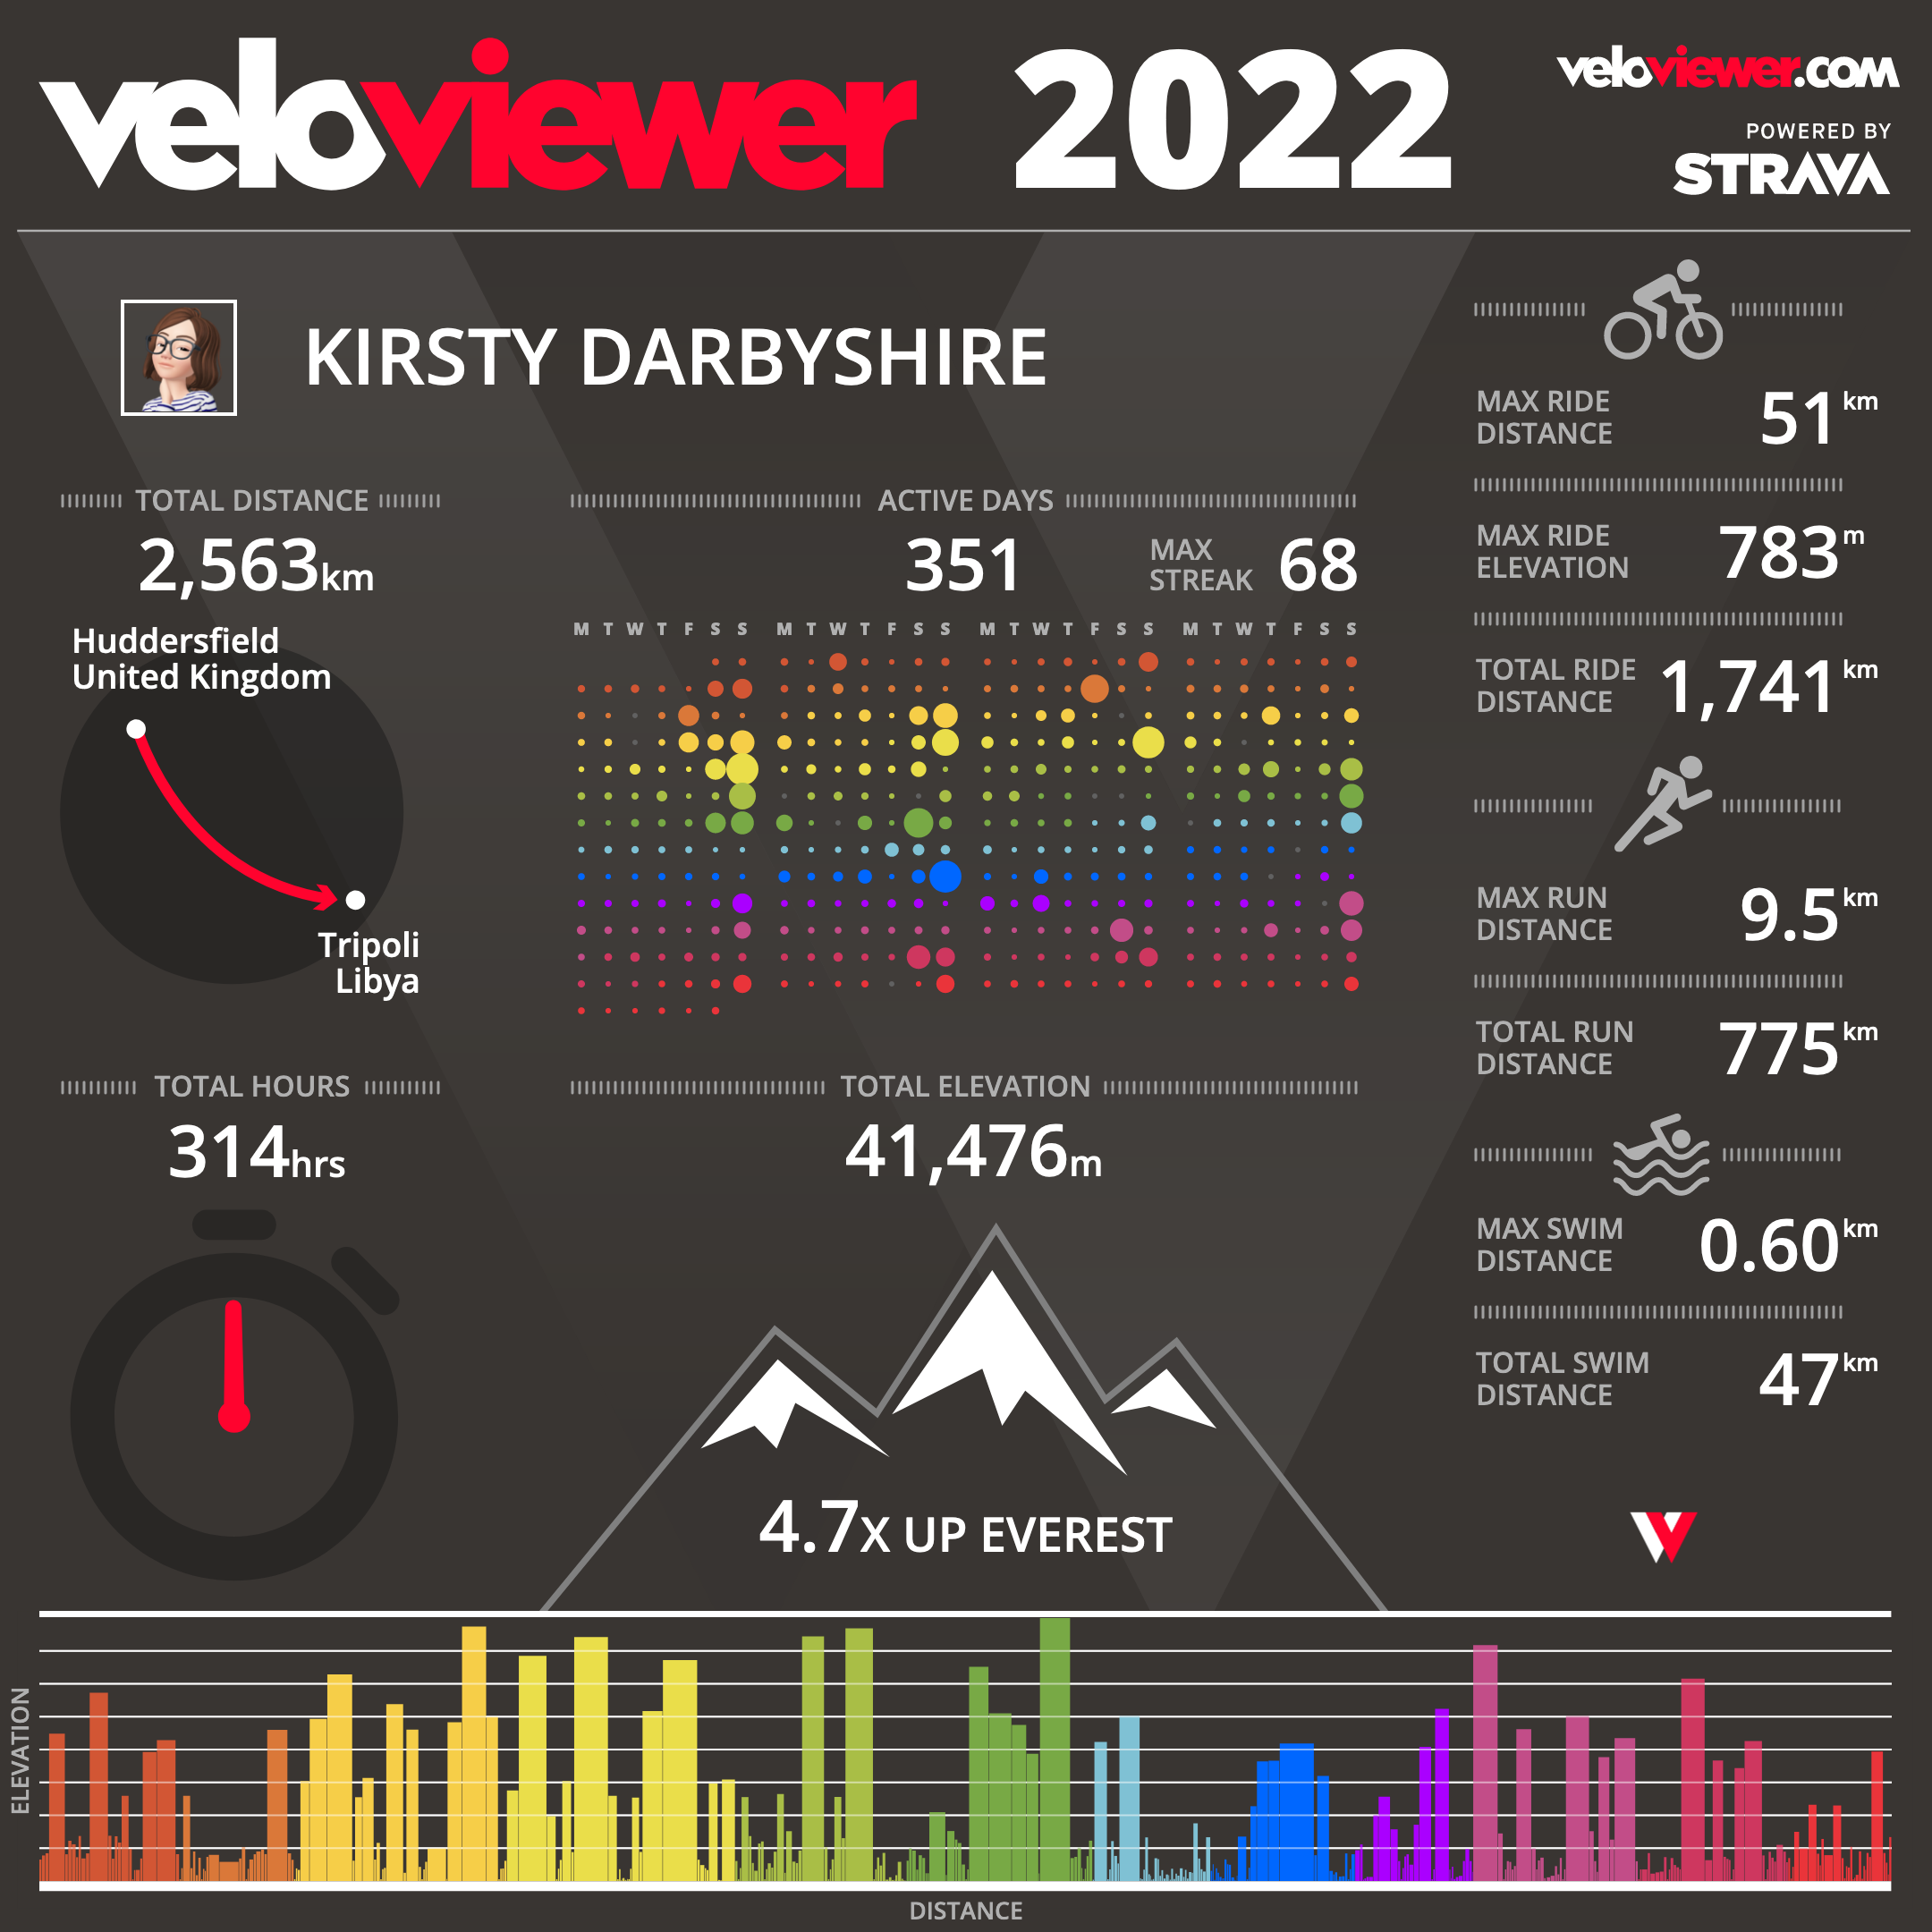 Featured image for 2022 in Veloviewer